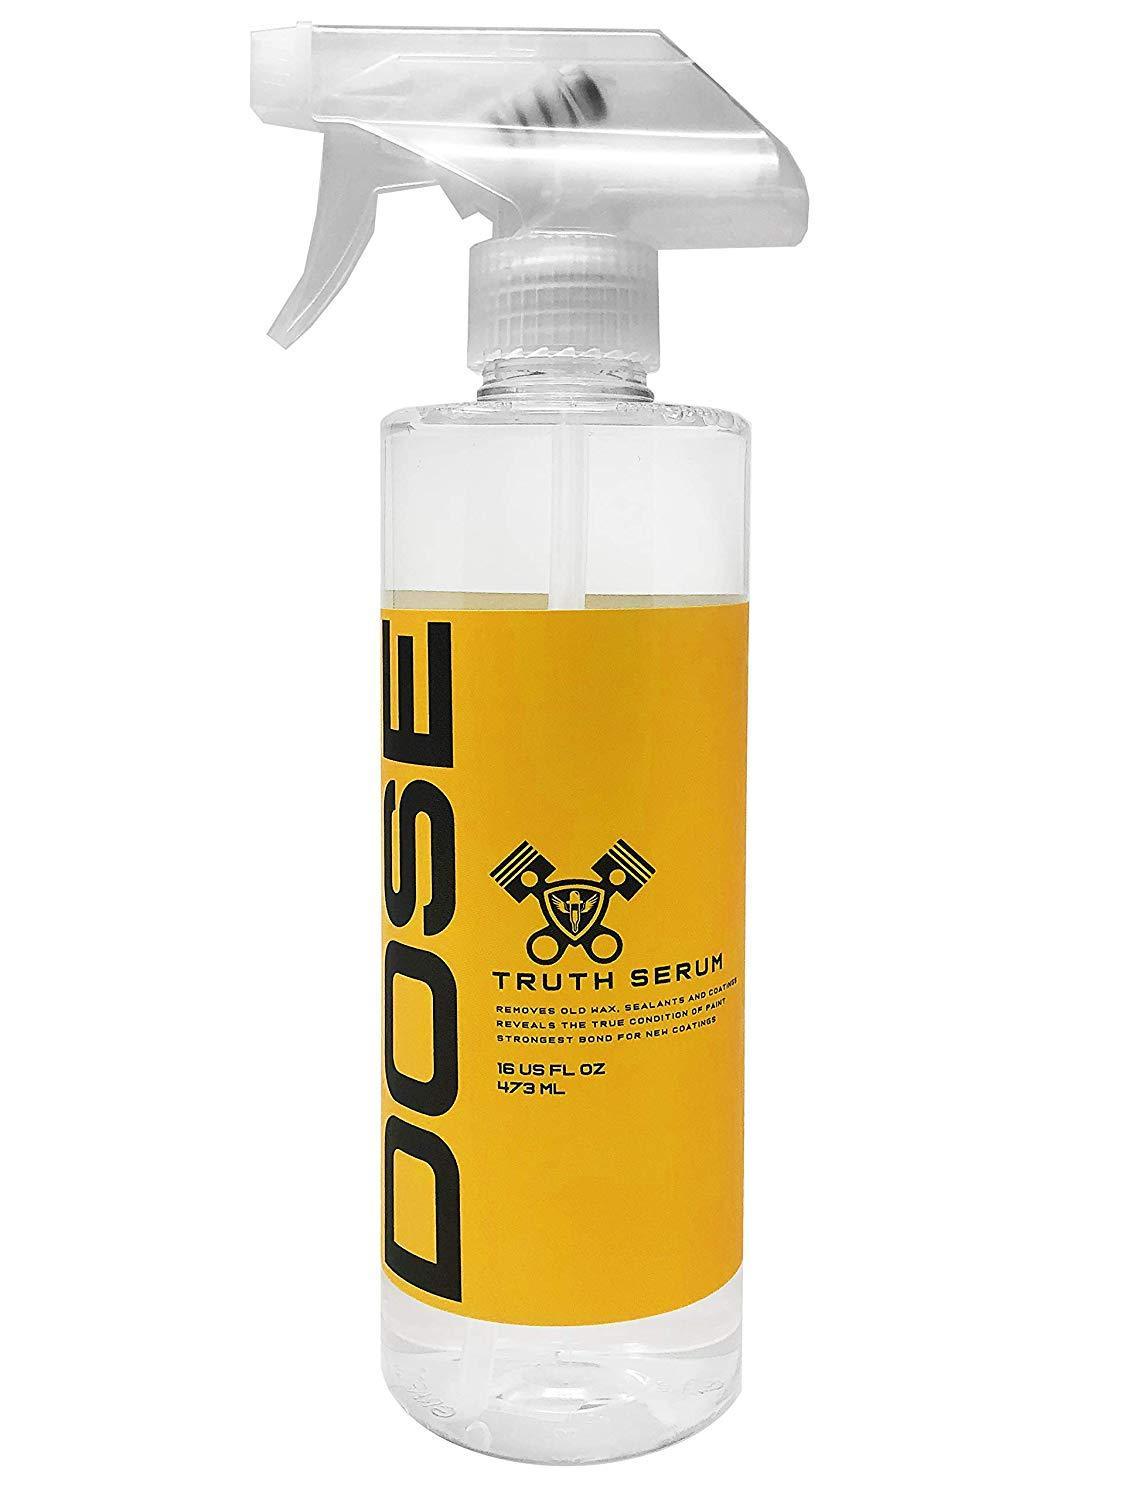 DOSE Truth Serum Paint Surface Coating Remover Wax, Sealants, Grease 16 Ounce Bottle (MCF) - The VViViD Vinyl Wrap Shop